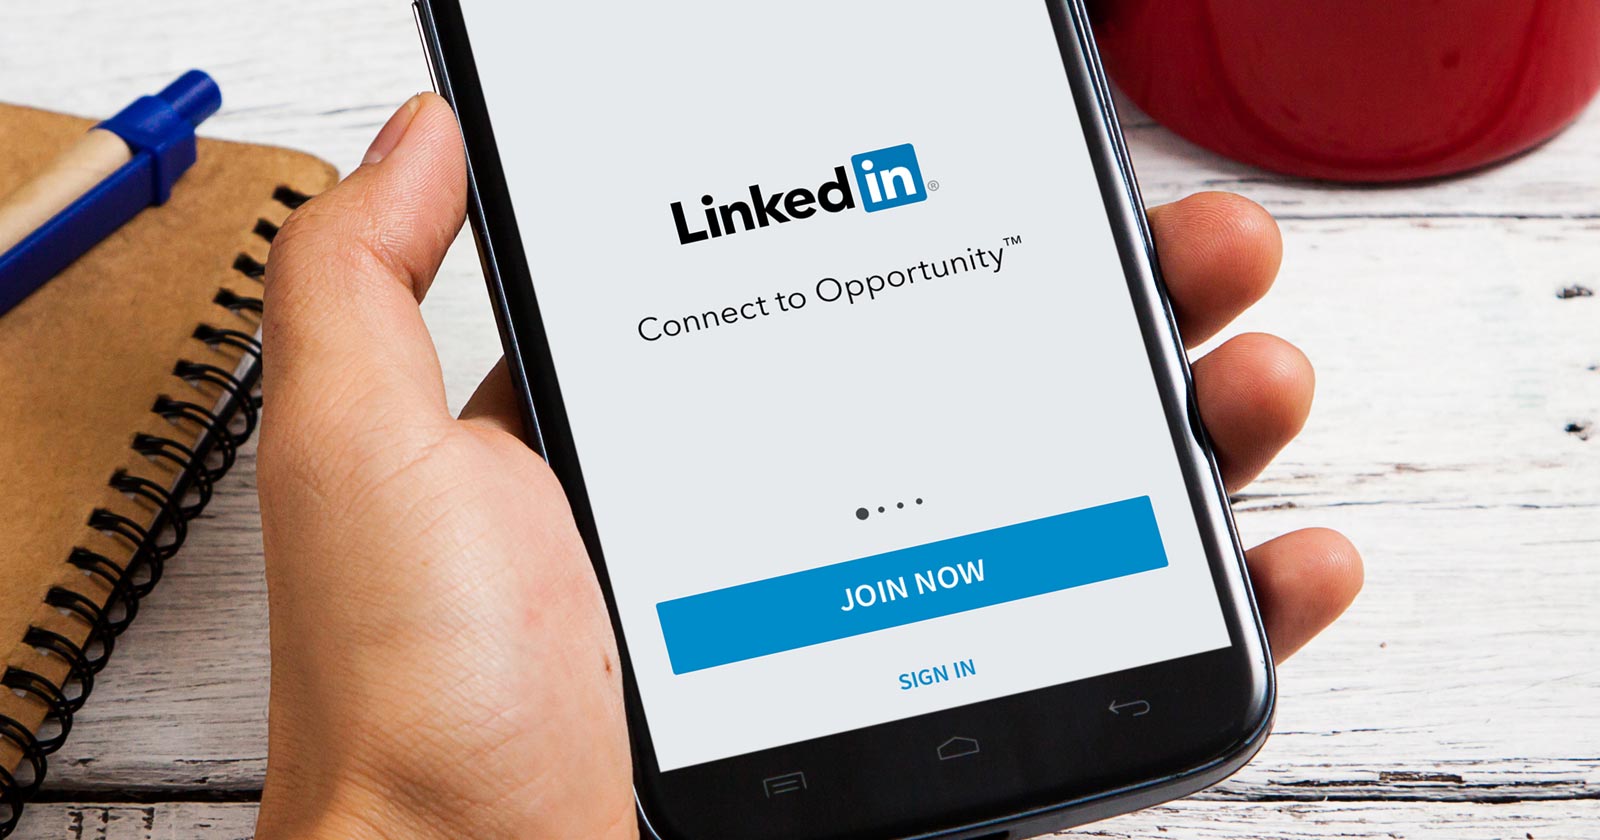 LinkedIn's SEO strategy resulted in 10 million expert articles